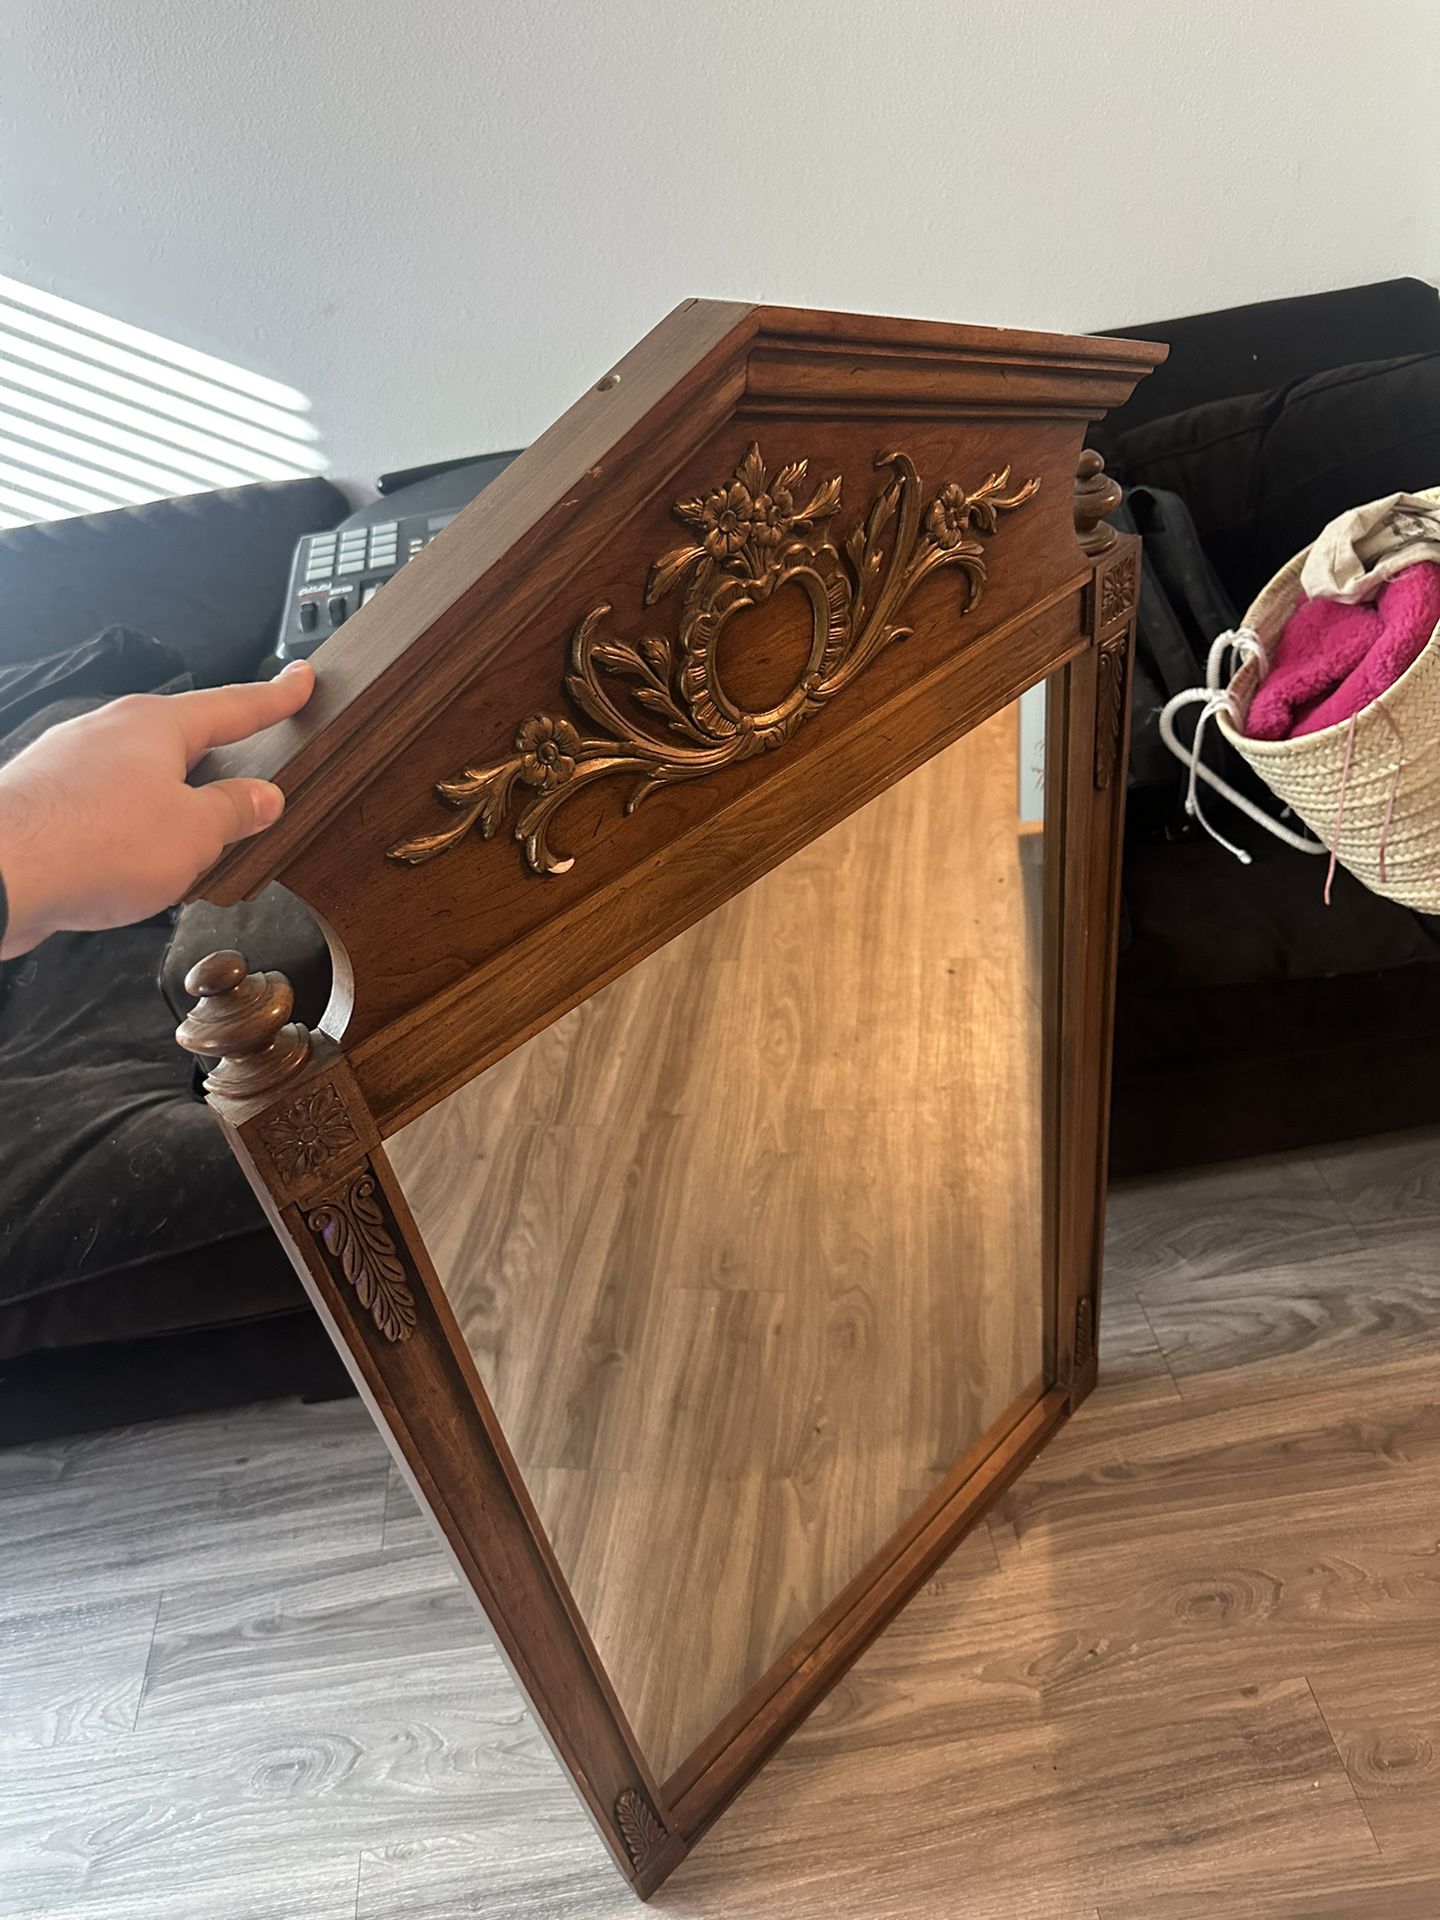 BEAUTIFUL ANTIQUE WOODEN MIRROR NEED GONE